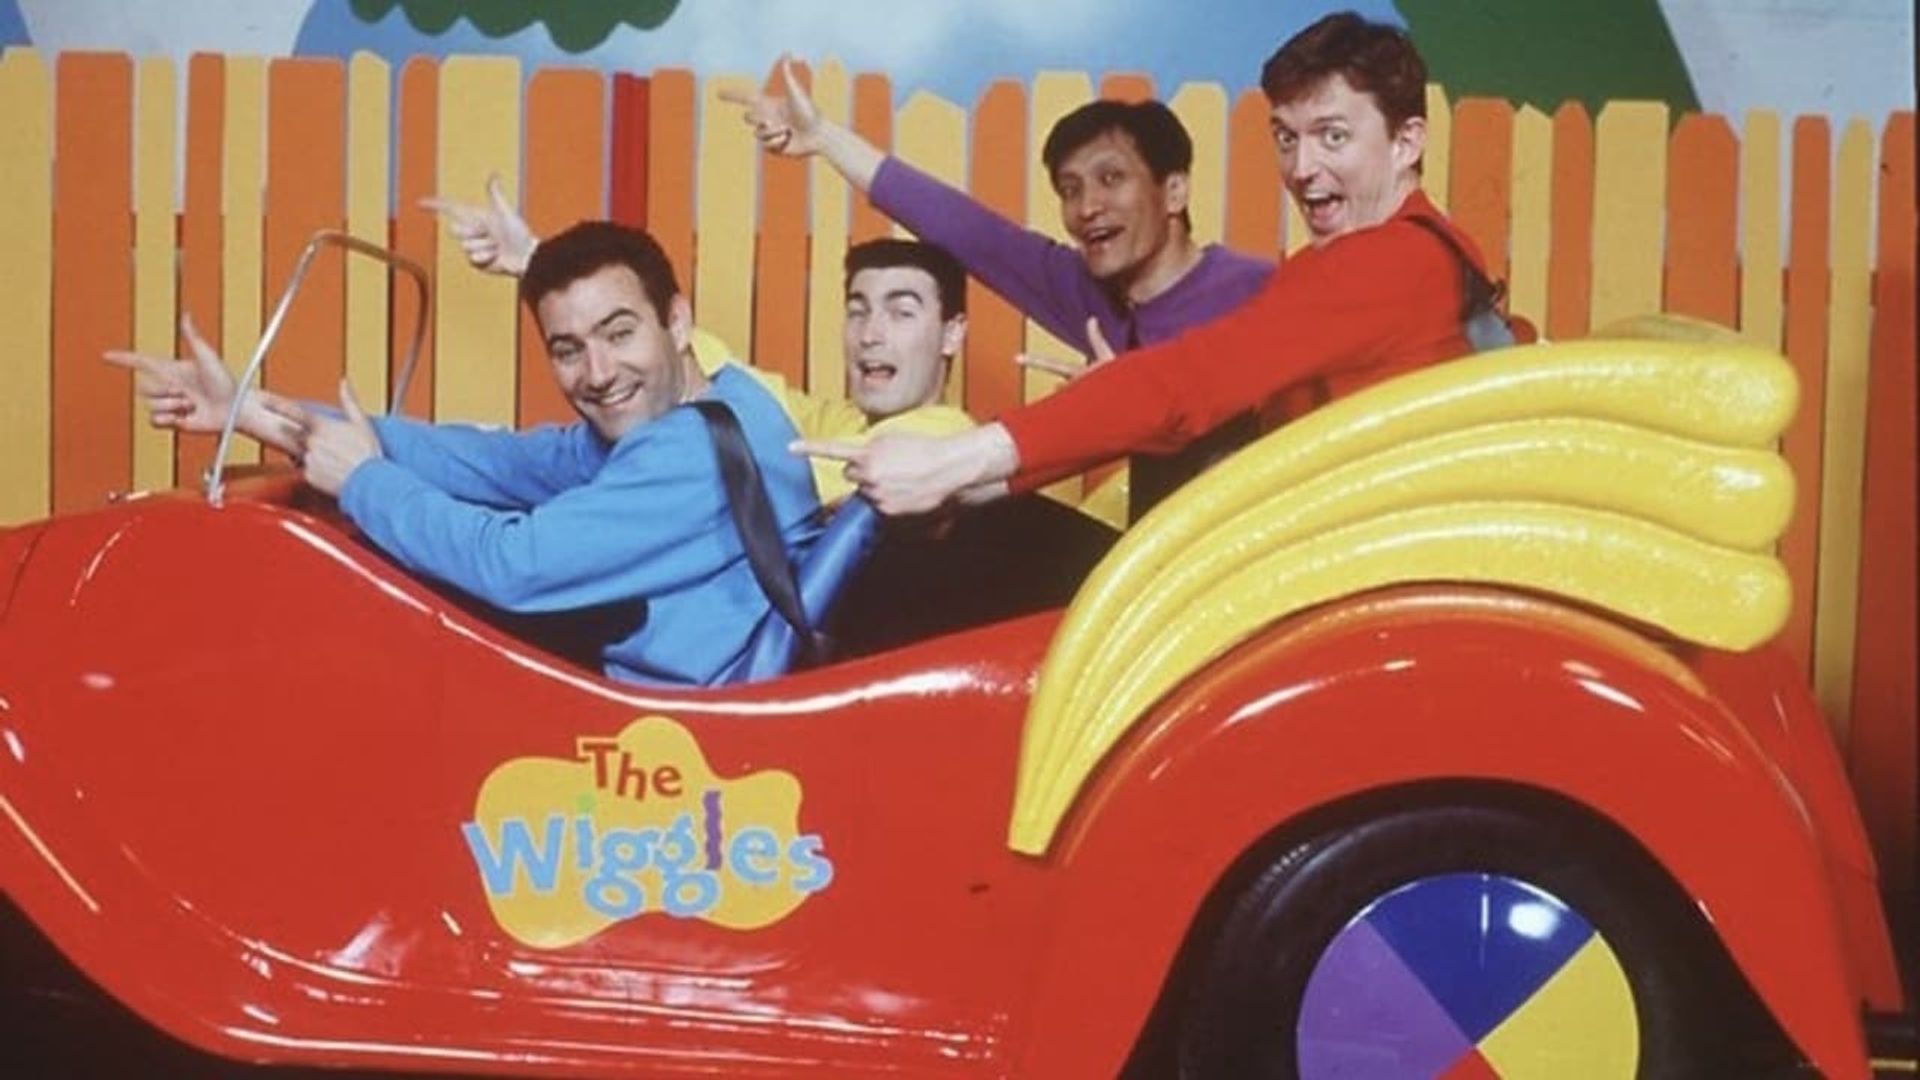 The Wiggles background